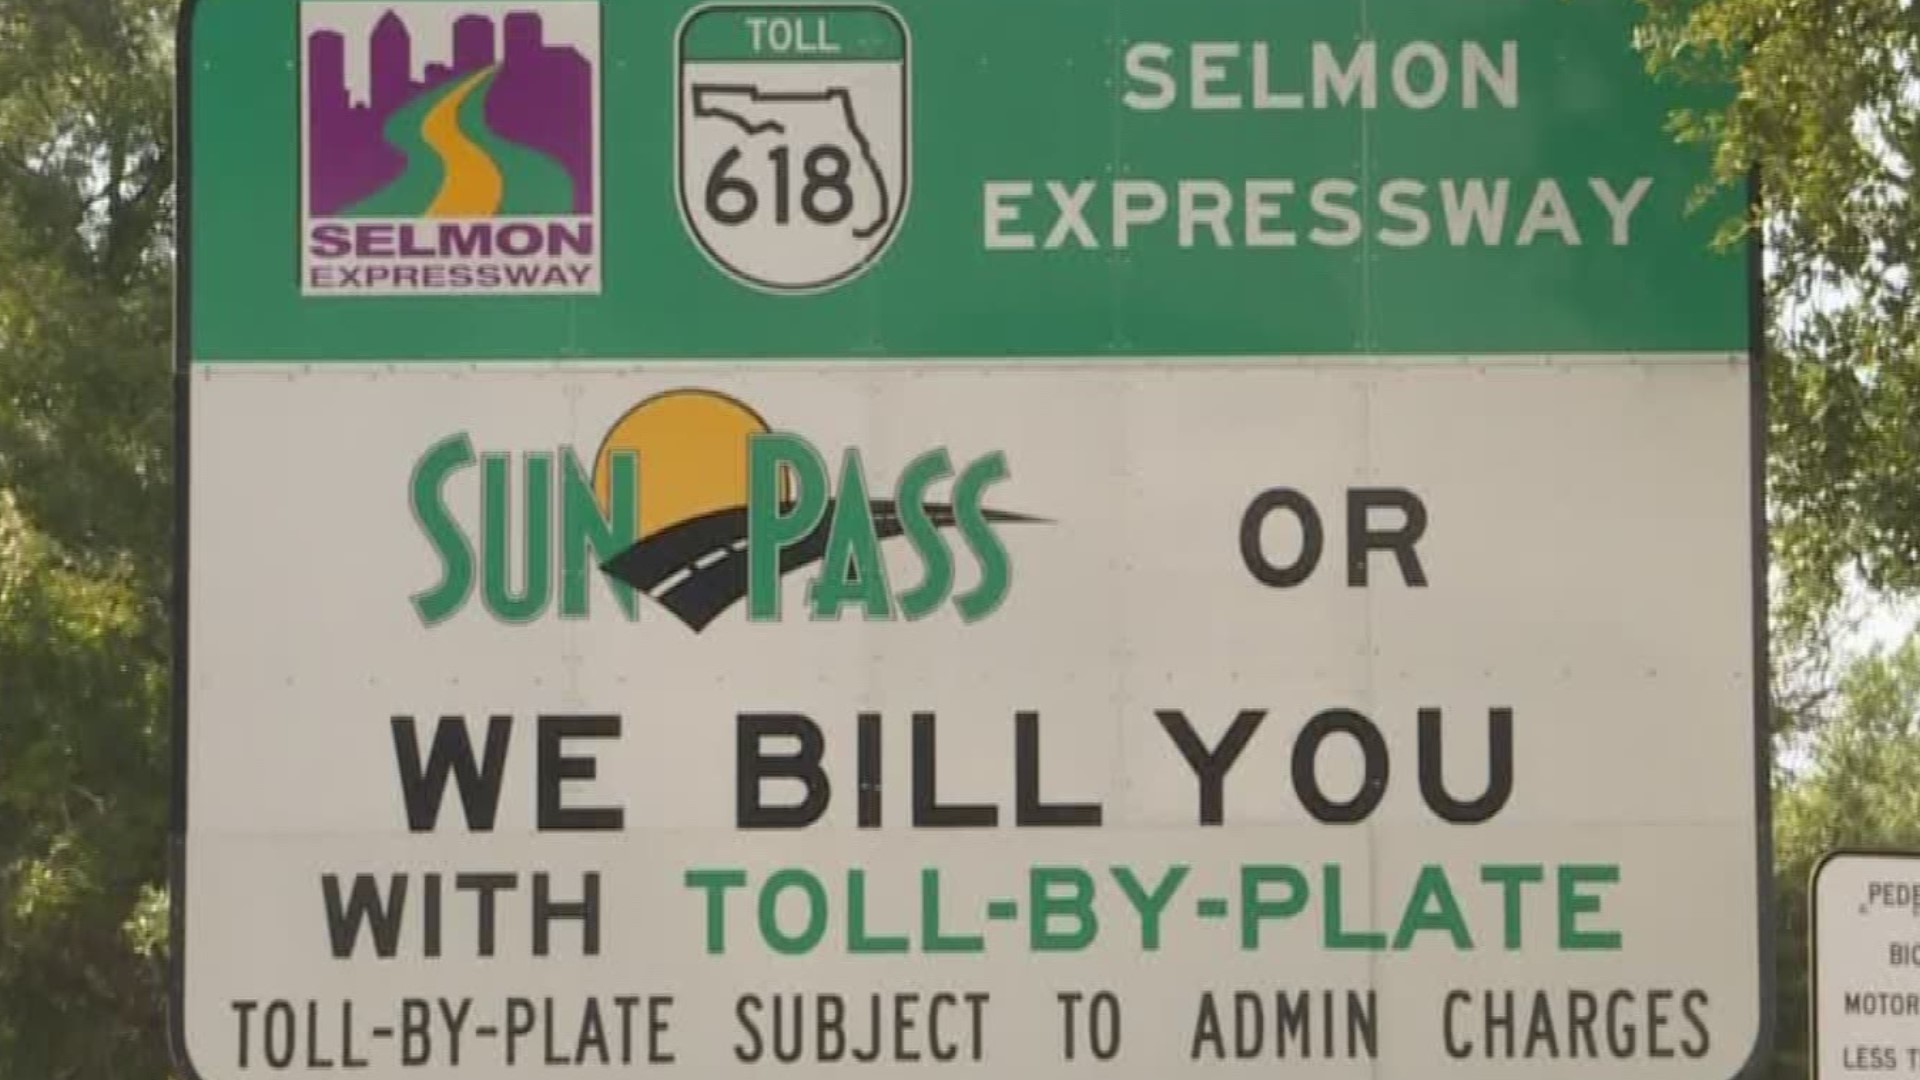 Gov. Ron DeSantis suspended all fees and penalties for SunPass and Toll-By-Plate drivers after last year's massive billing system meltdown that resulted in millions of backlogged tolls and angry and frustrated customers. Under this new billing system, no matter where you're driving, you'll get a bill from FDOT. But after two notices, some drivers are now getting collection letters -- to clarify: That bill is coming from THEA through the Credit Protection Association.